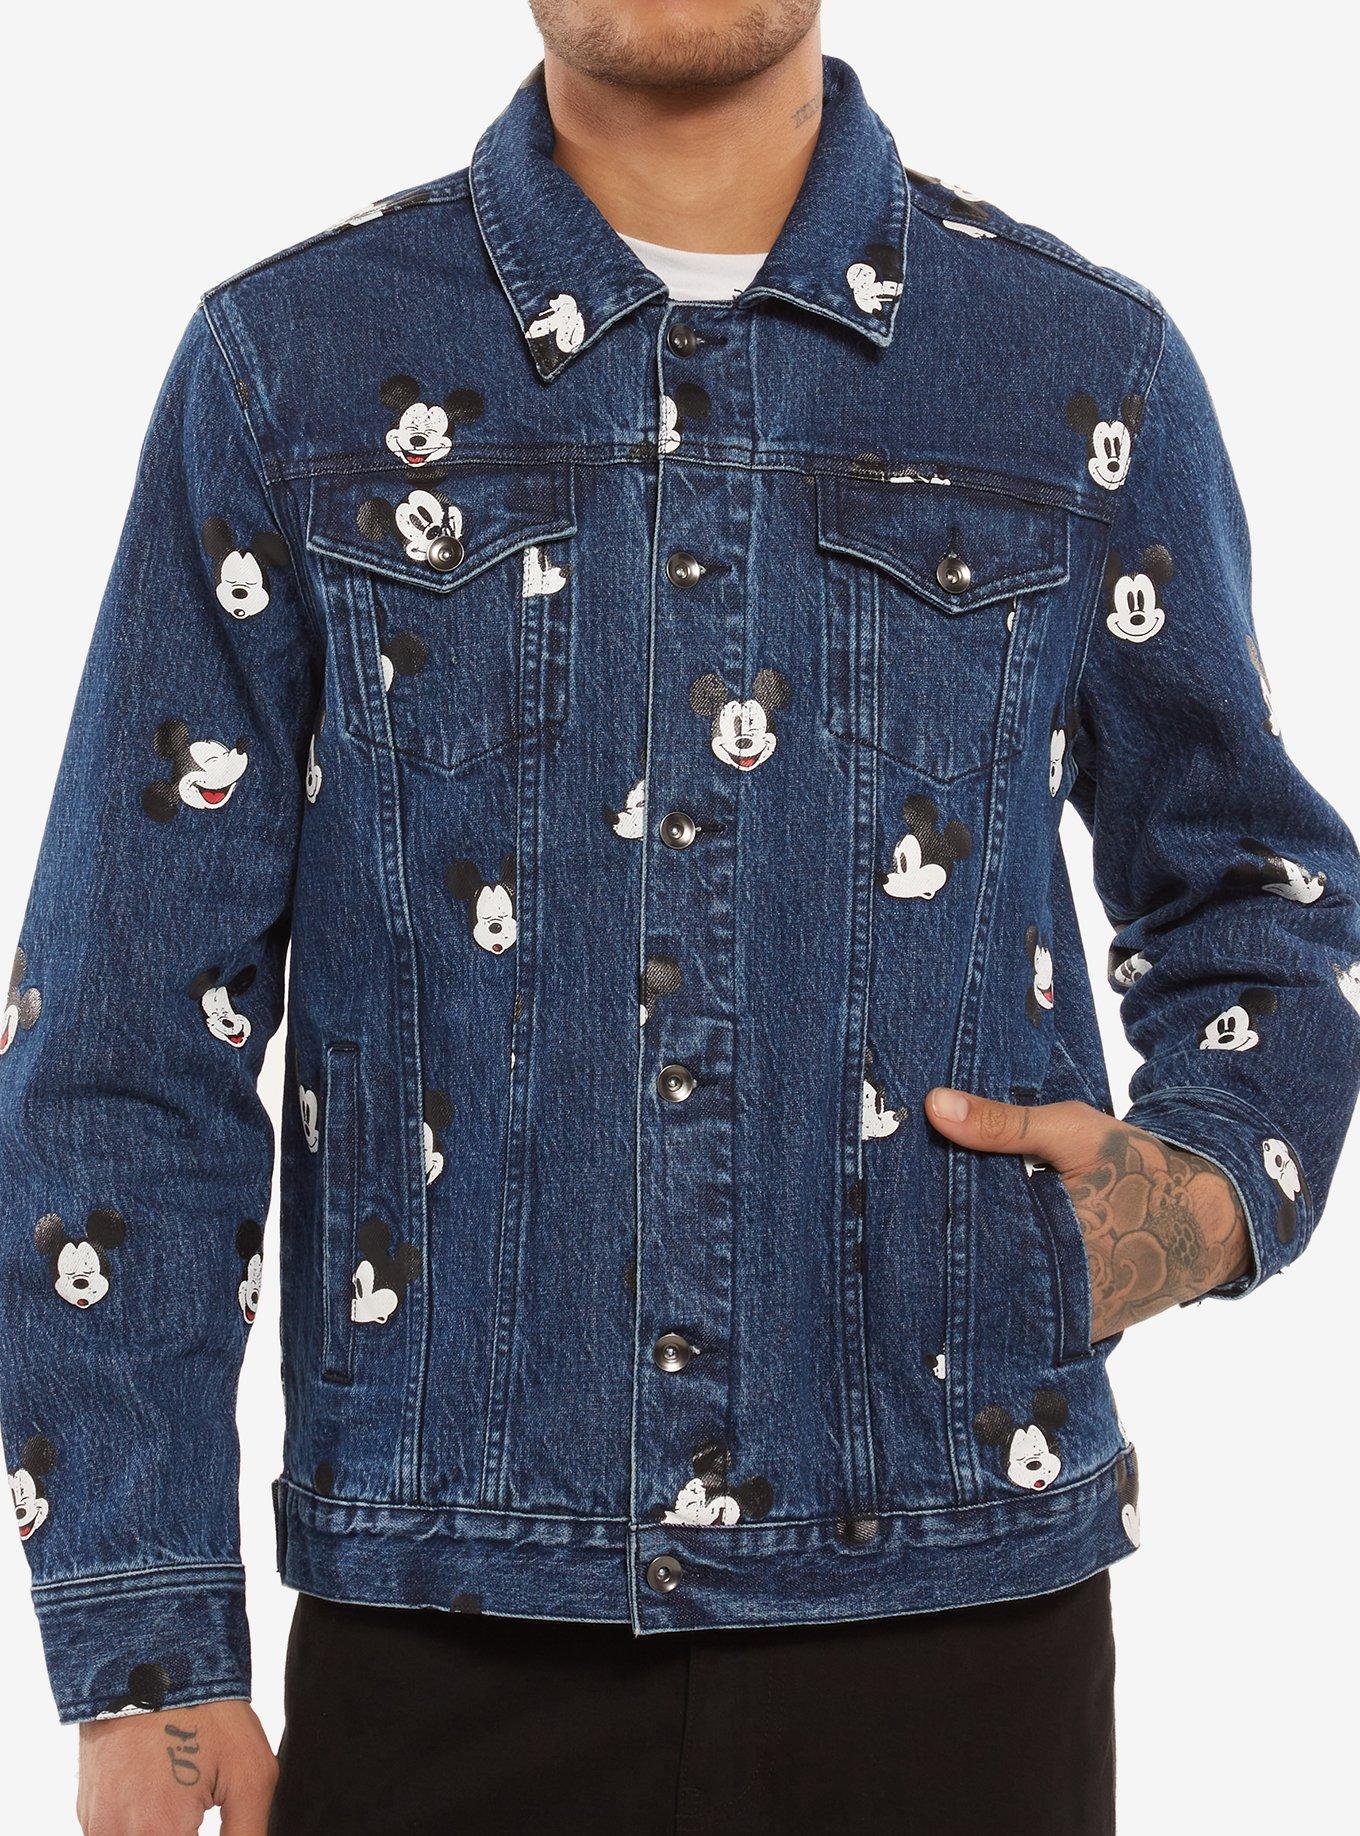 Our Universe Mickey Mouse Denim Jacket Her Universe